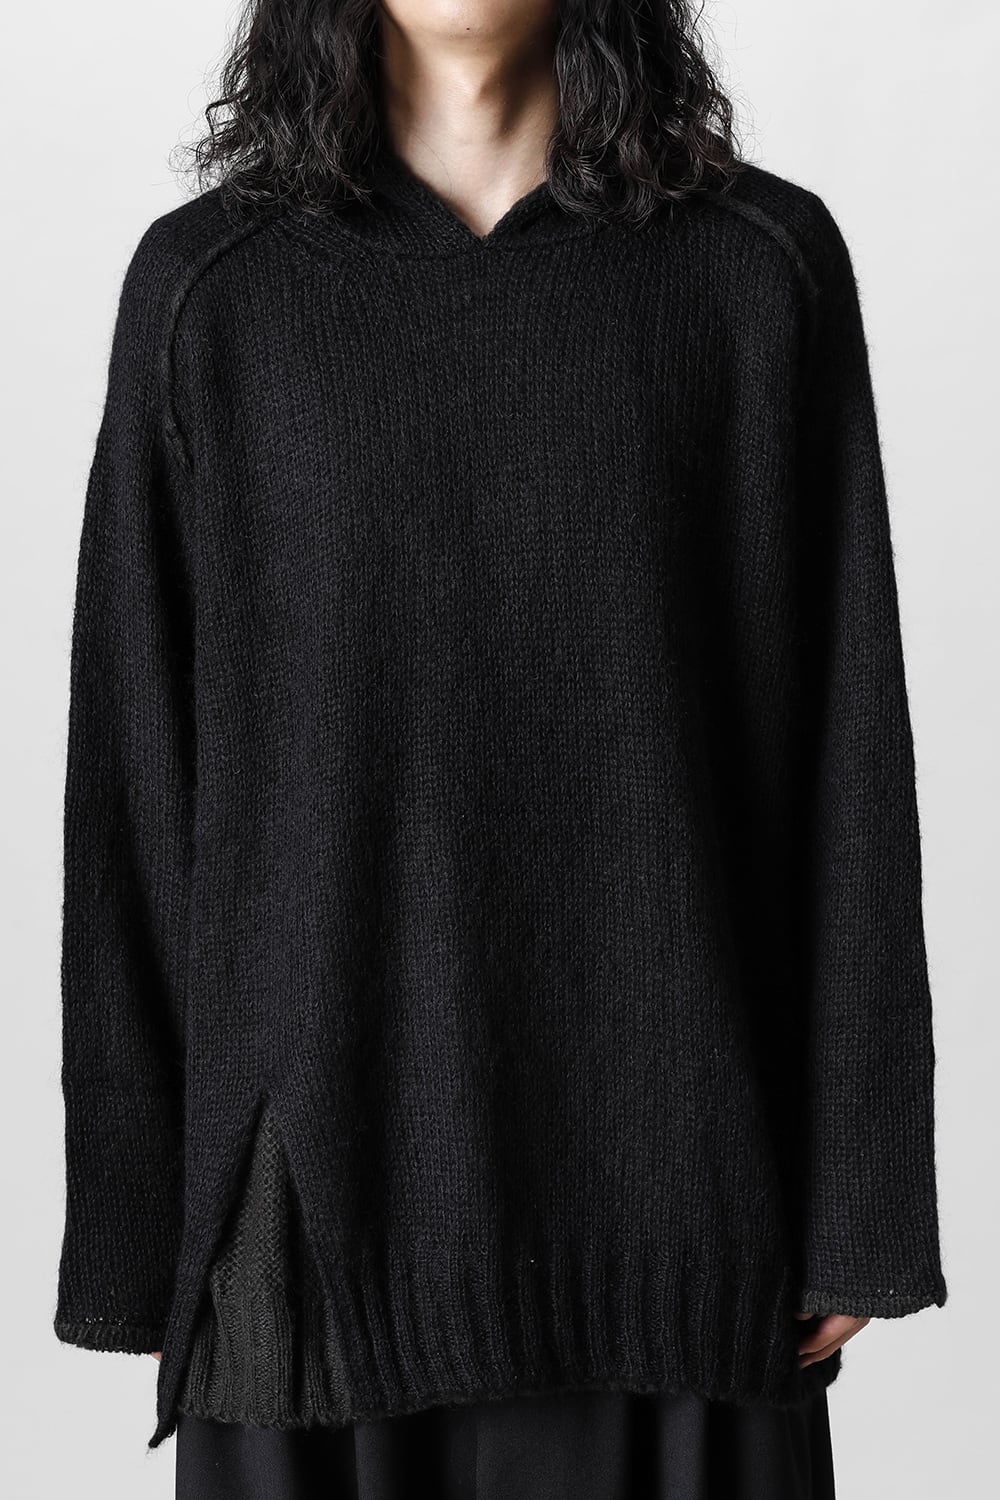 Yohji Yamamoto Pour Homme - Knit - Online Store - FASCINATE THE R